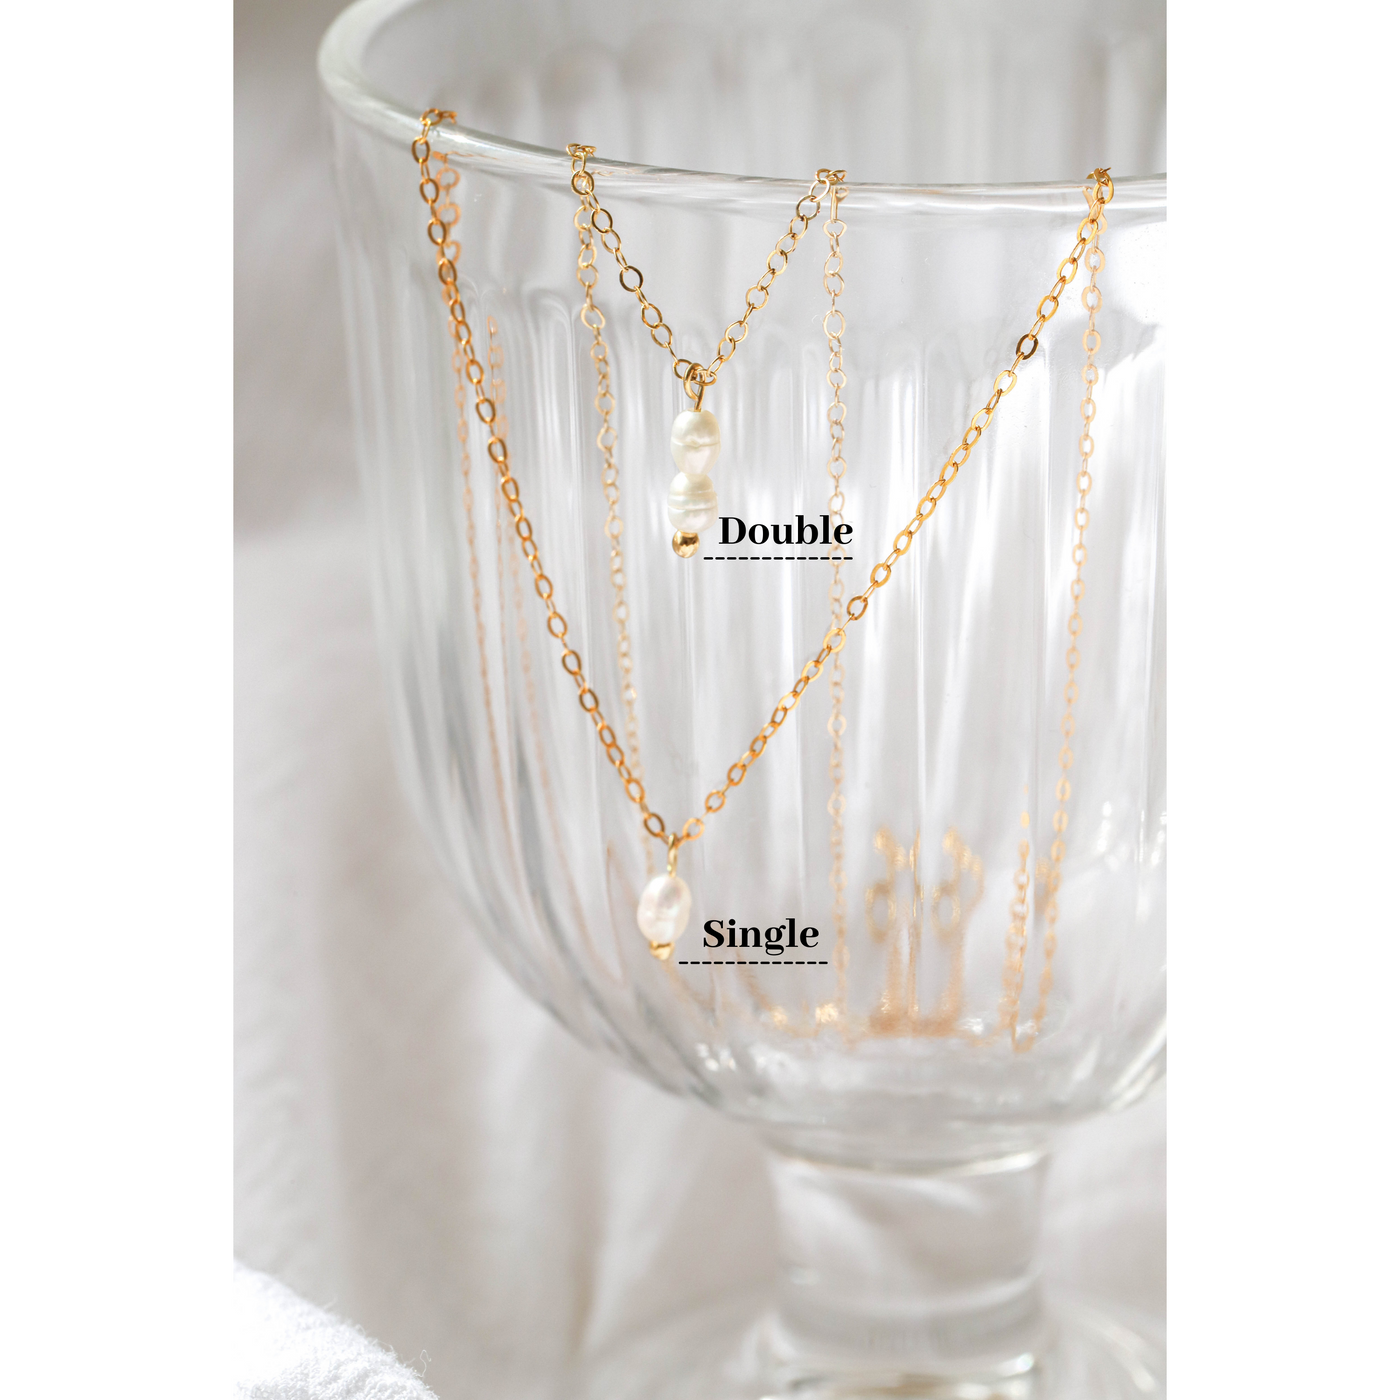 14K gold filled necklace with pearls